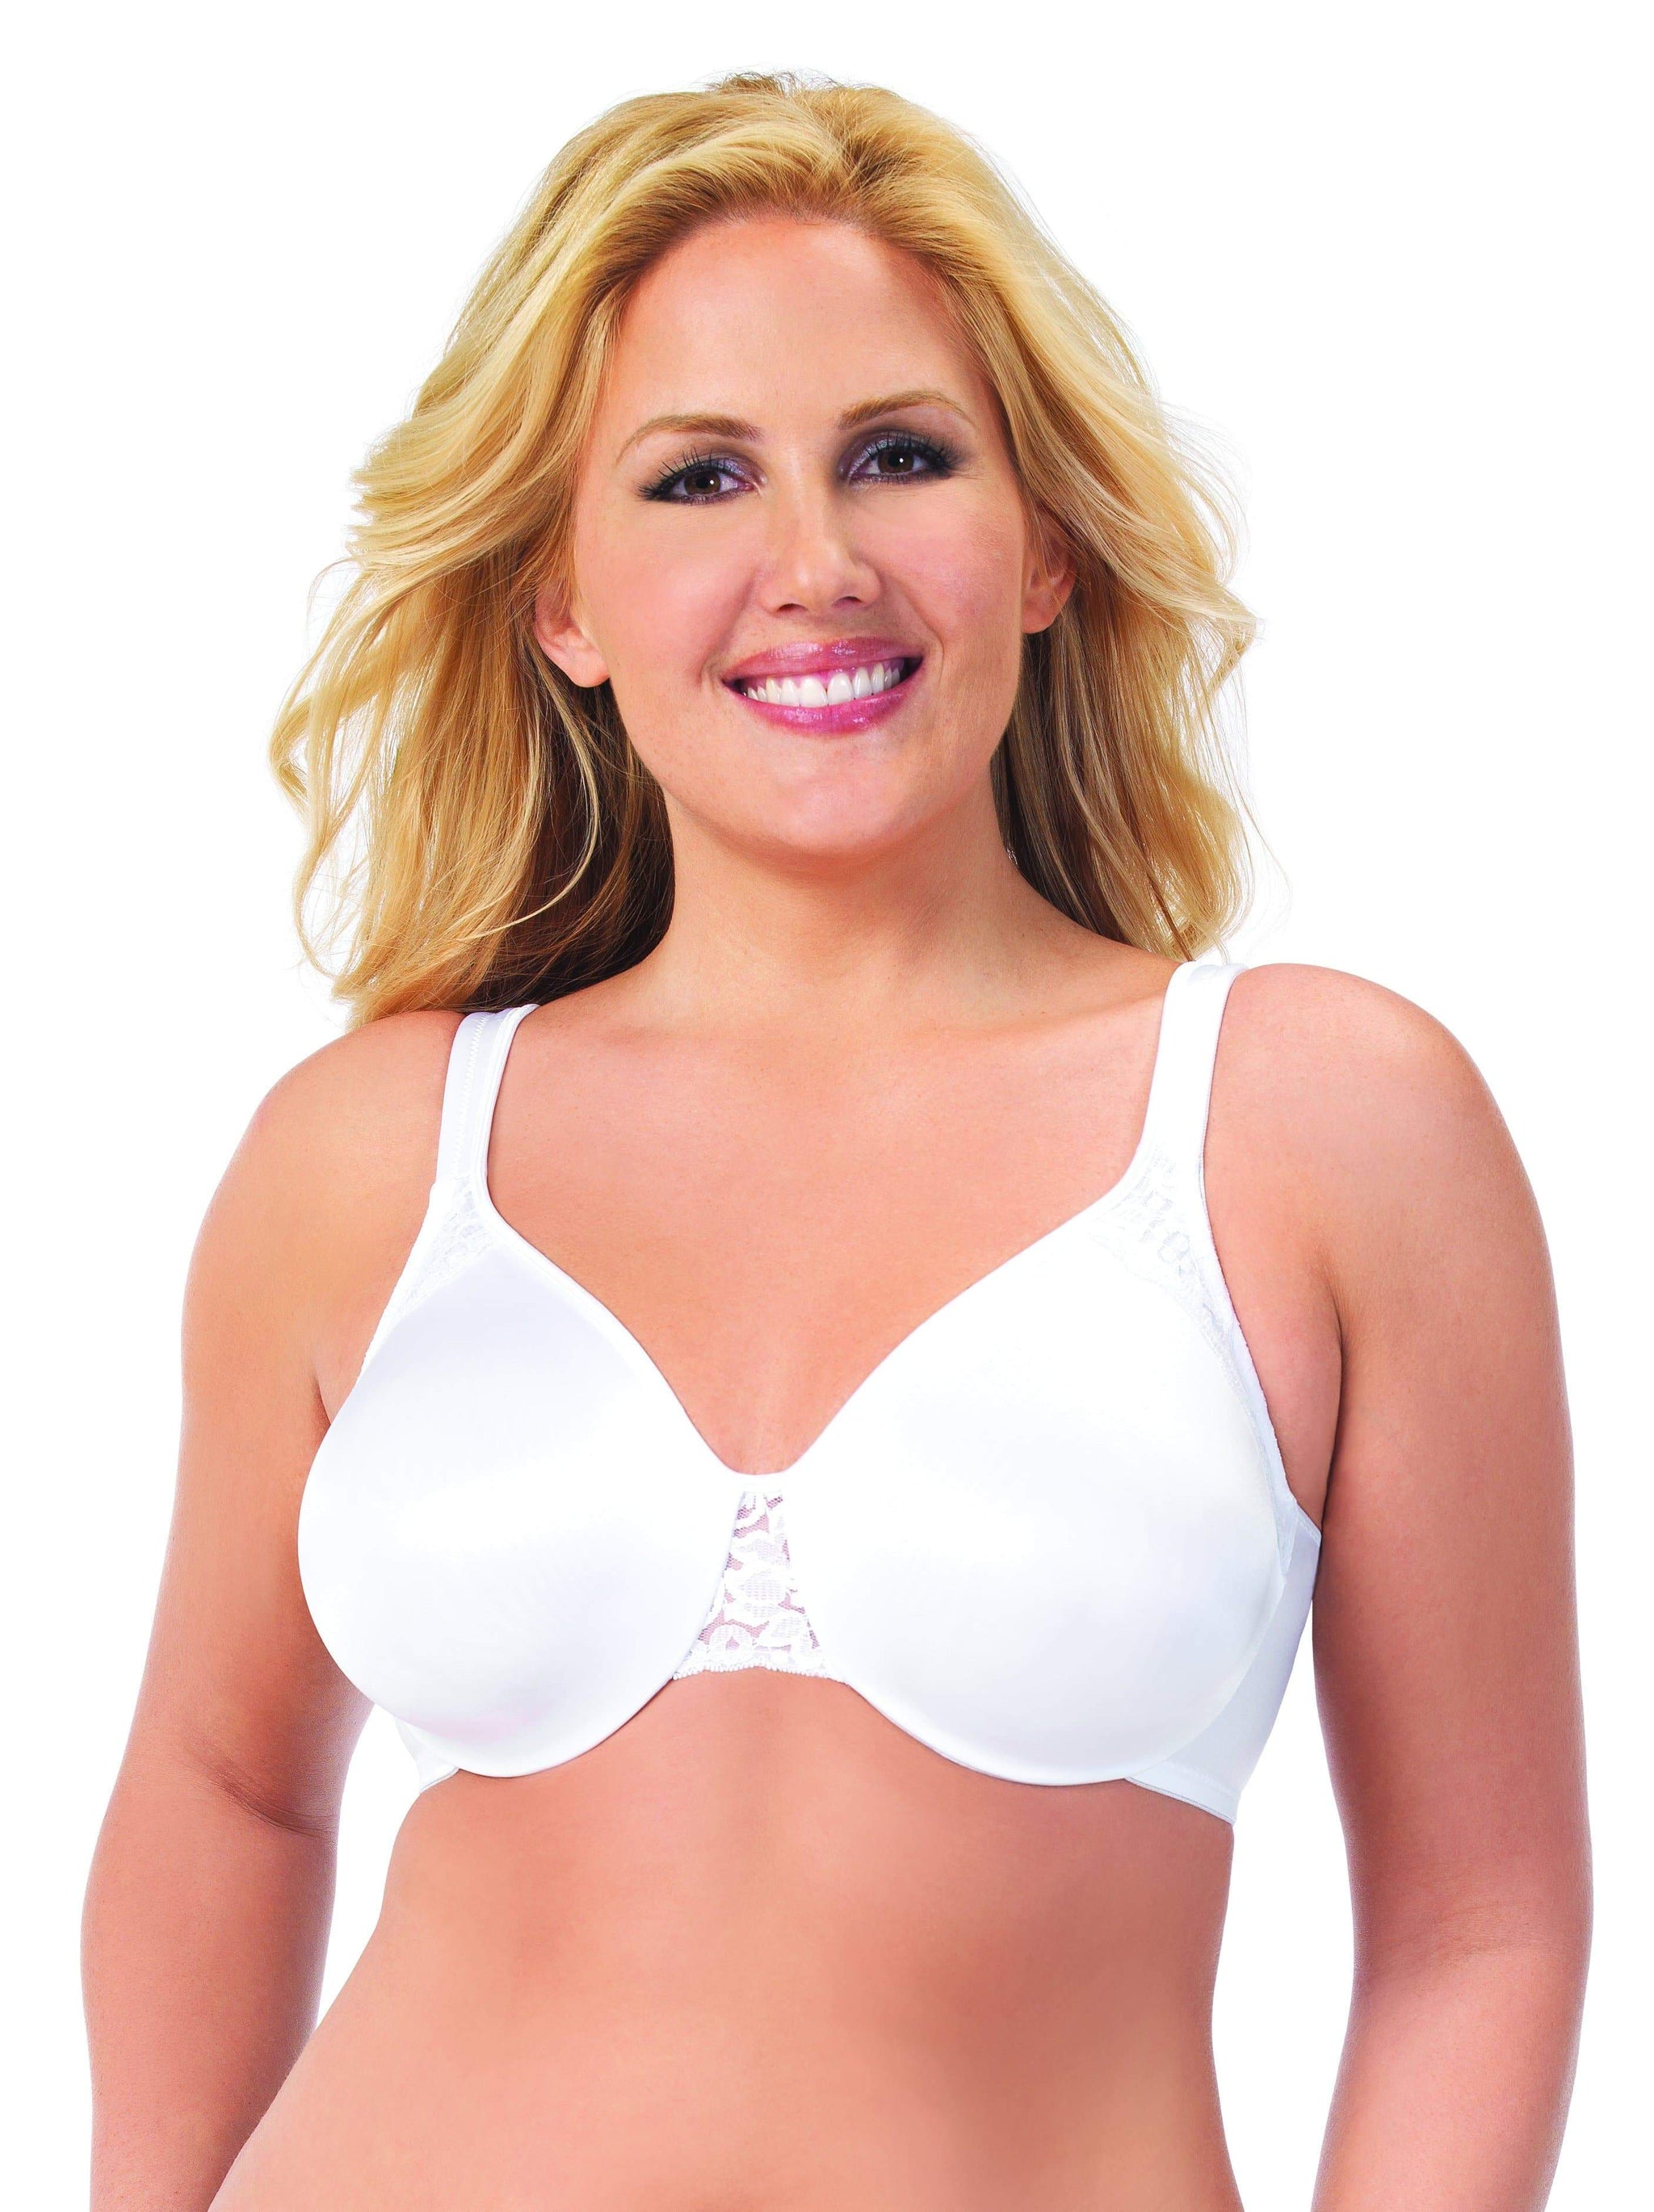 Fit Fully Yours Lingerie - Manufacturer, Importer and Distributor